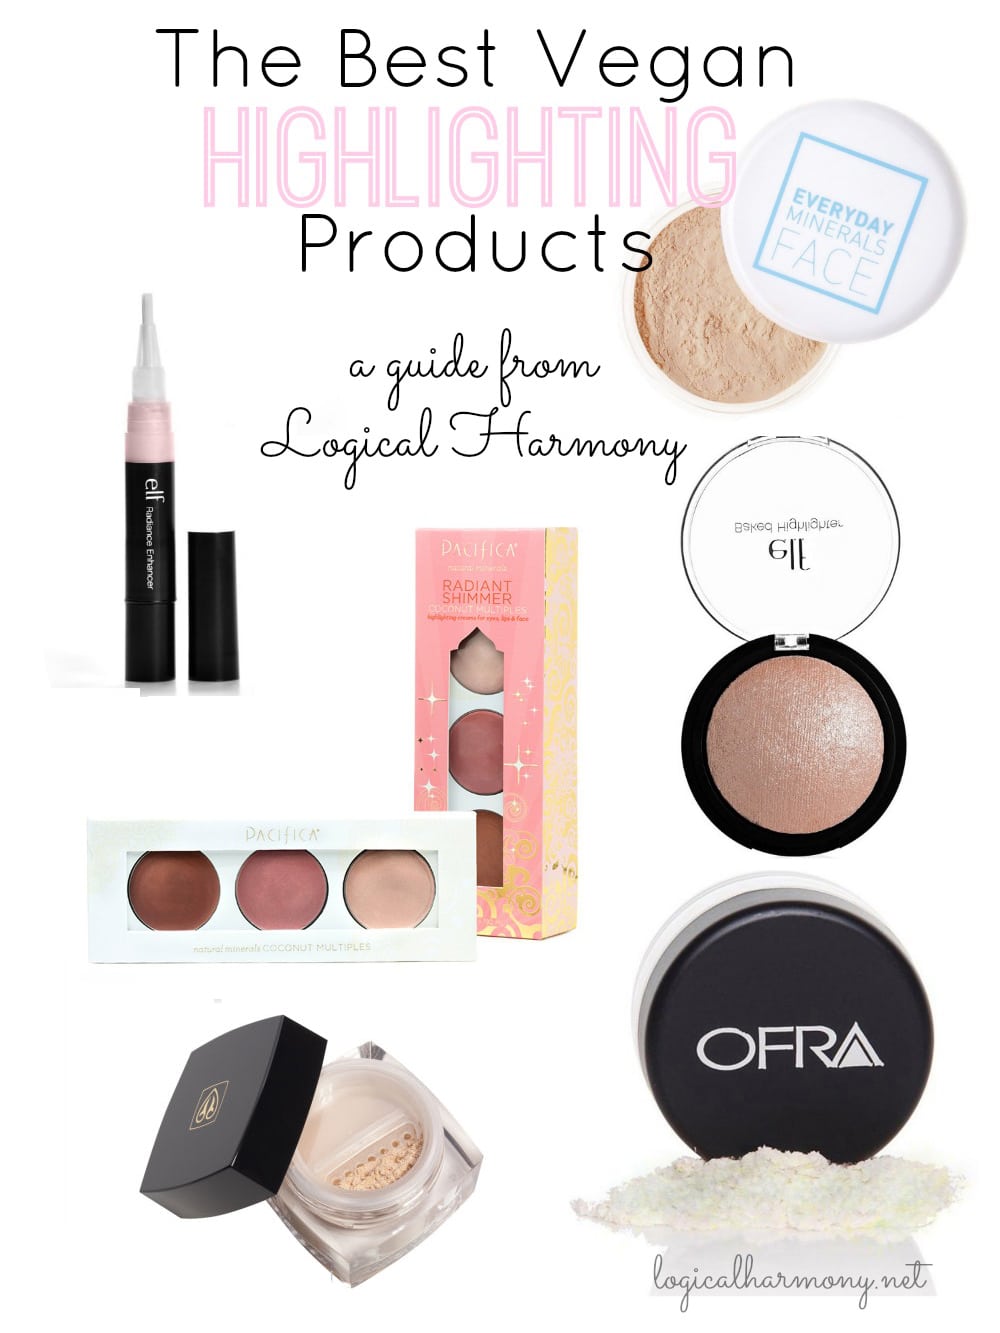 The Best Vegan Highlighting Products